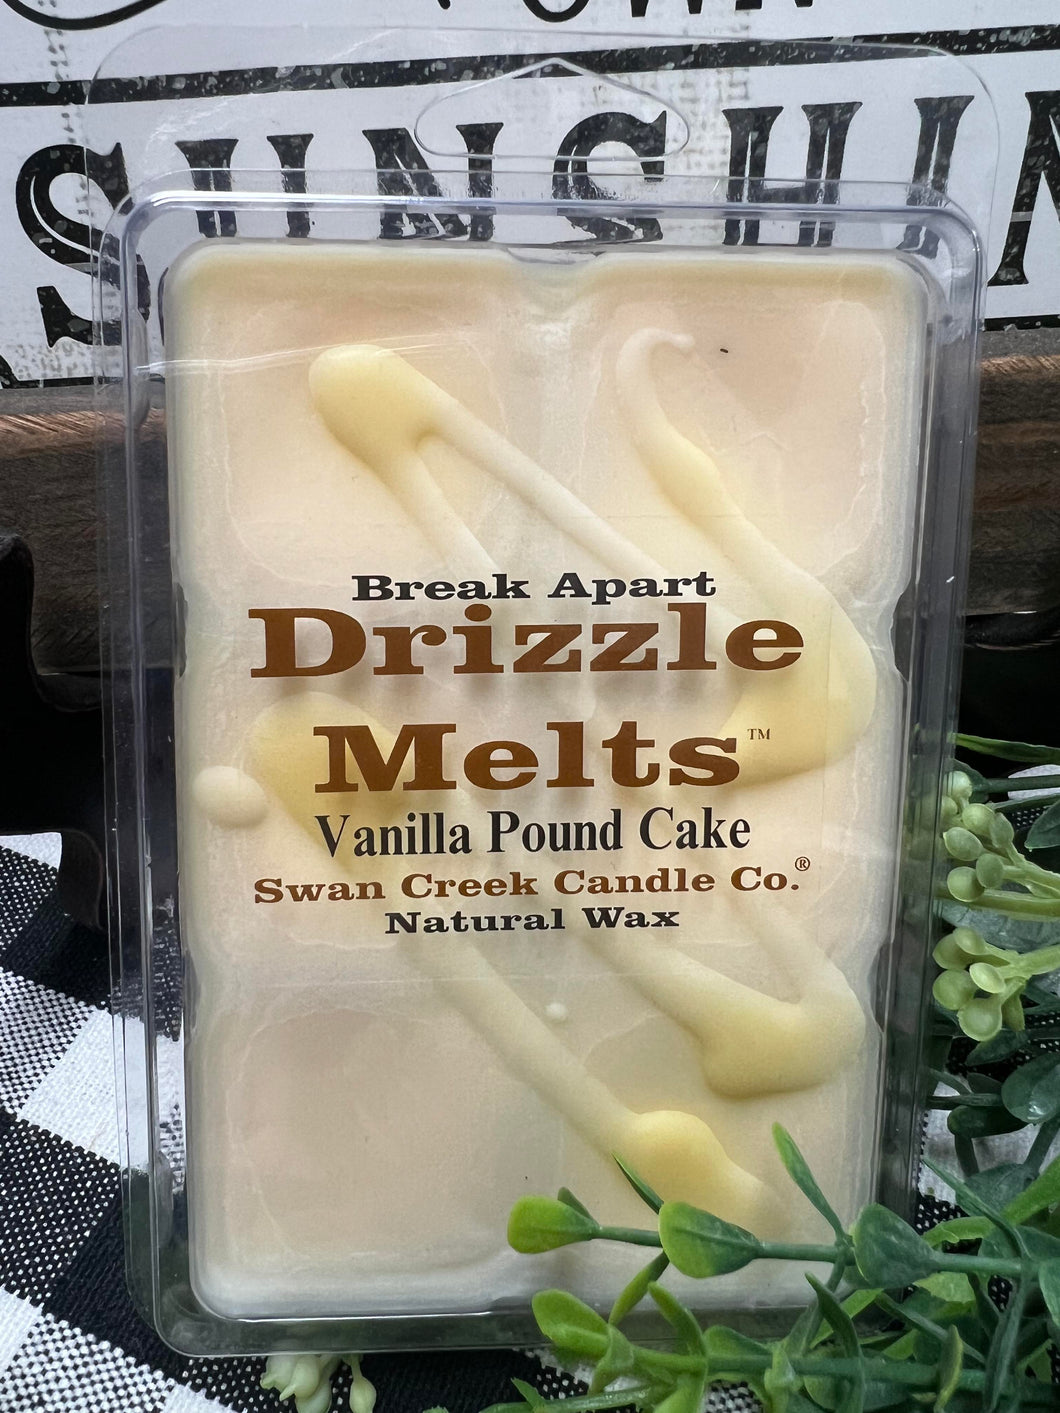 Swan Creek Candle Co. Vanilla Pound Cake Drizzle Melts